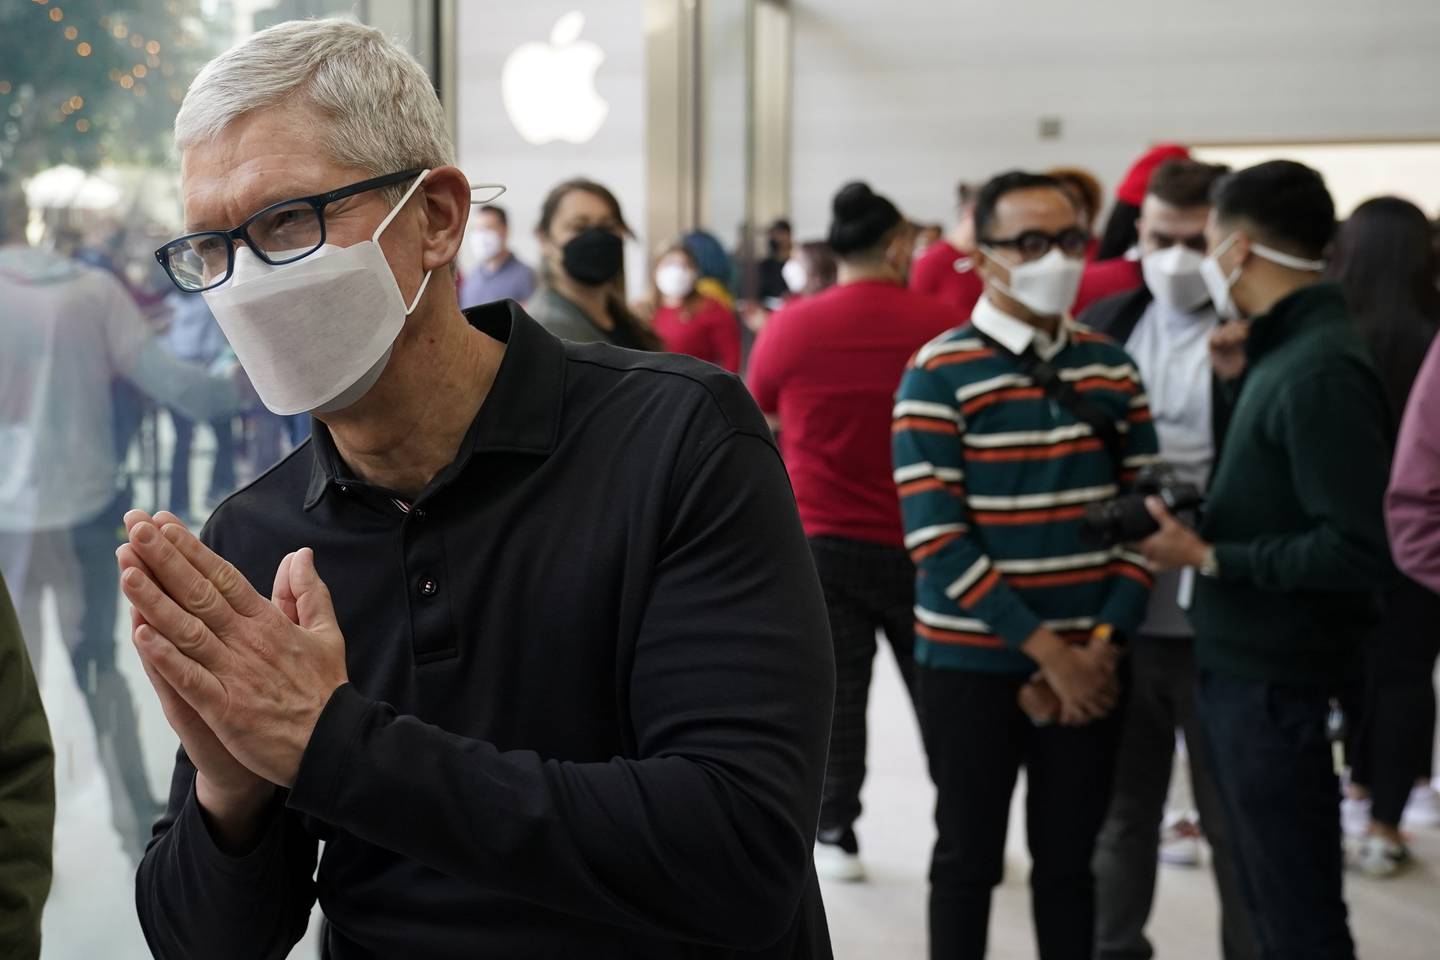 Apple's chief executive Tim Cook, who earned more than $98.7 million in salary last year, talks with customers during a visit to an Apple Store in Los Angeles. AP